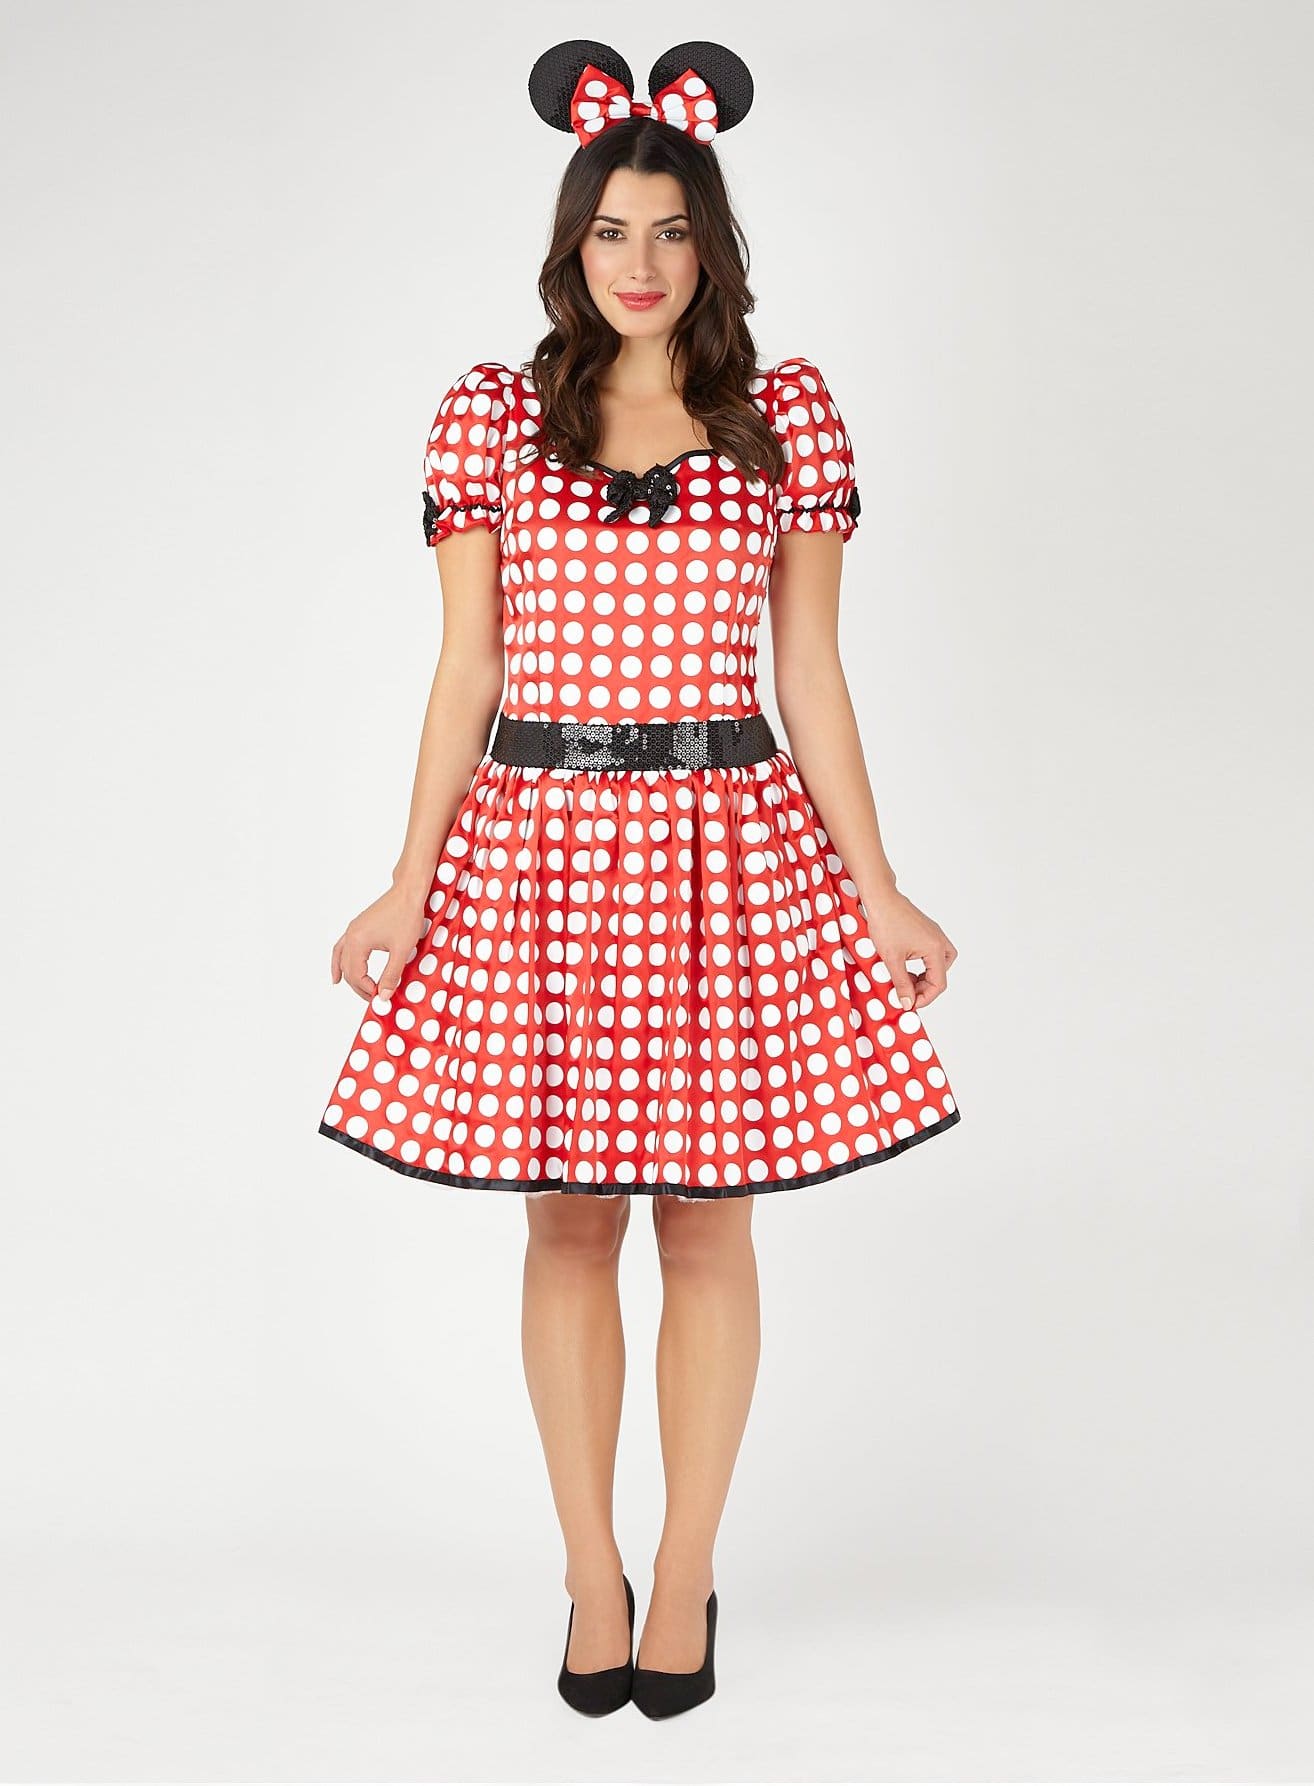 Minnie Mouse Dress,Outfit And Costume Idea